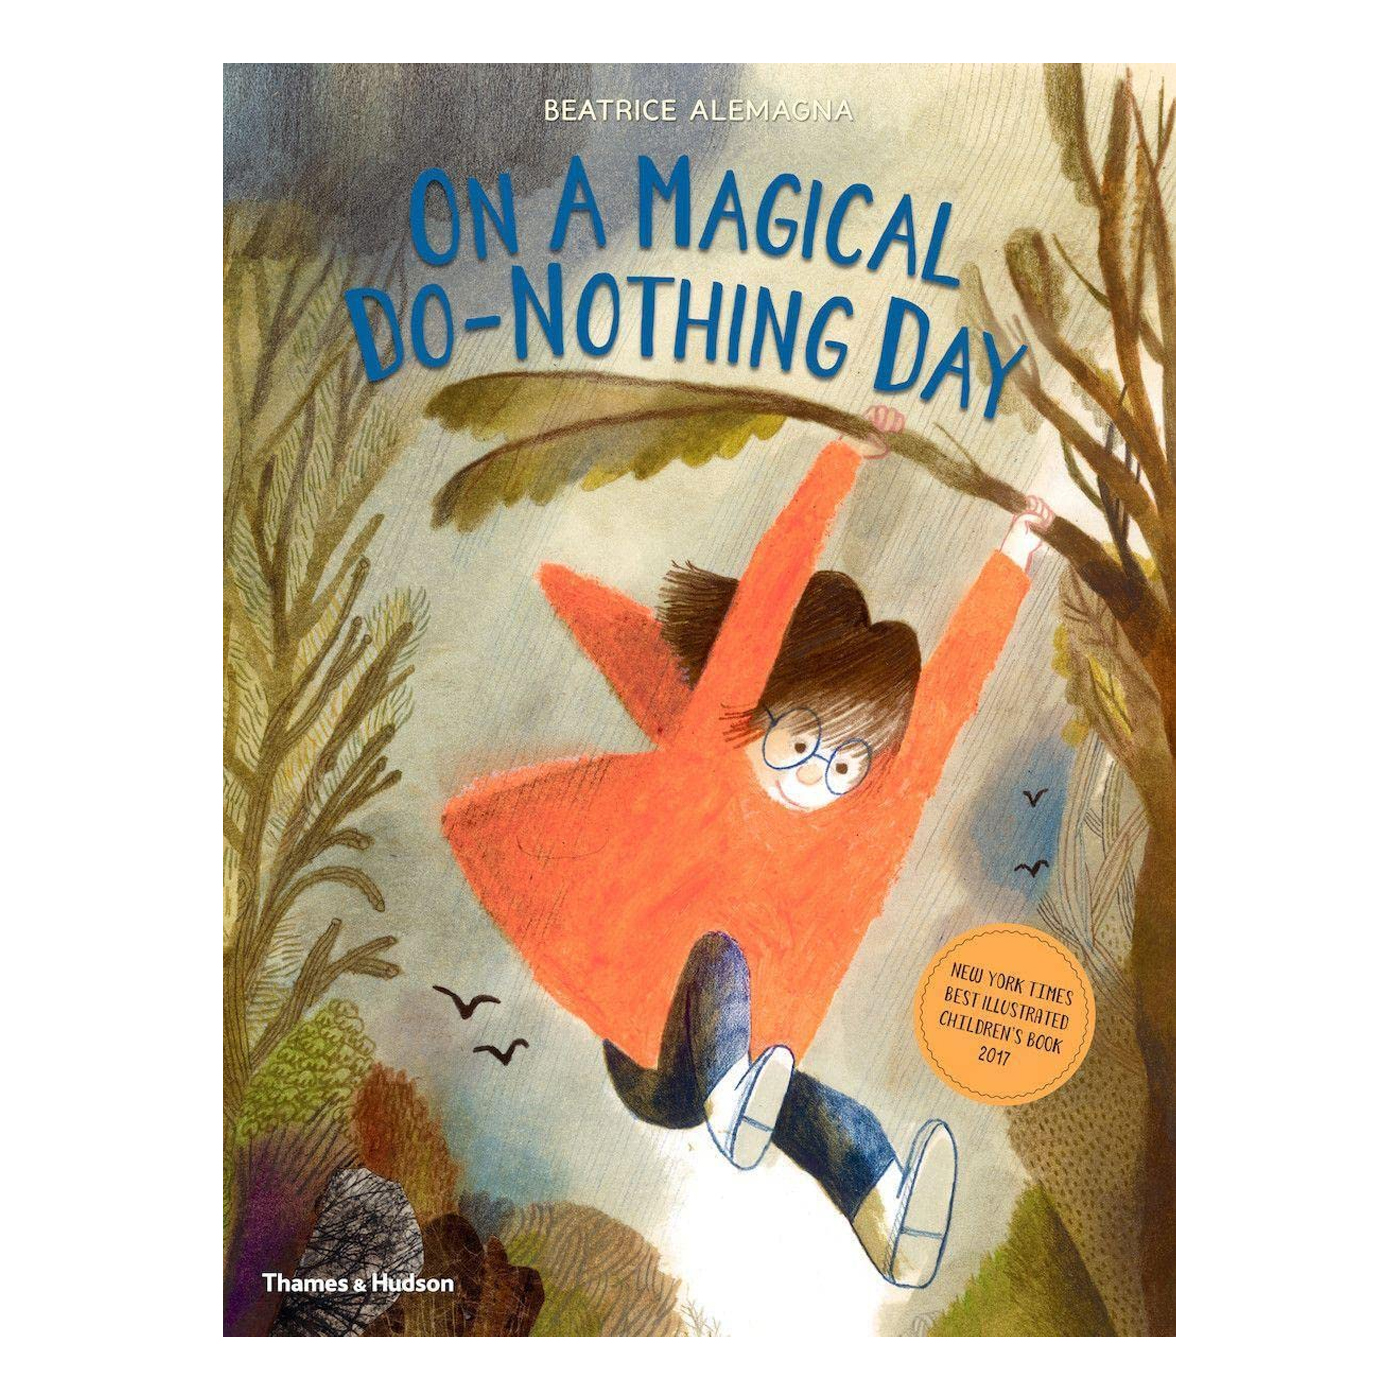  On A Magical Do-Nothing Day